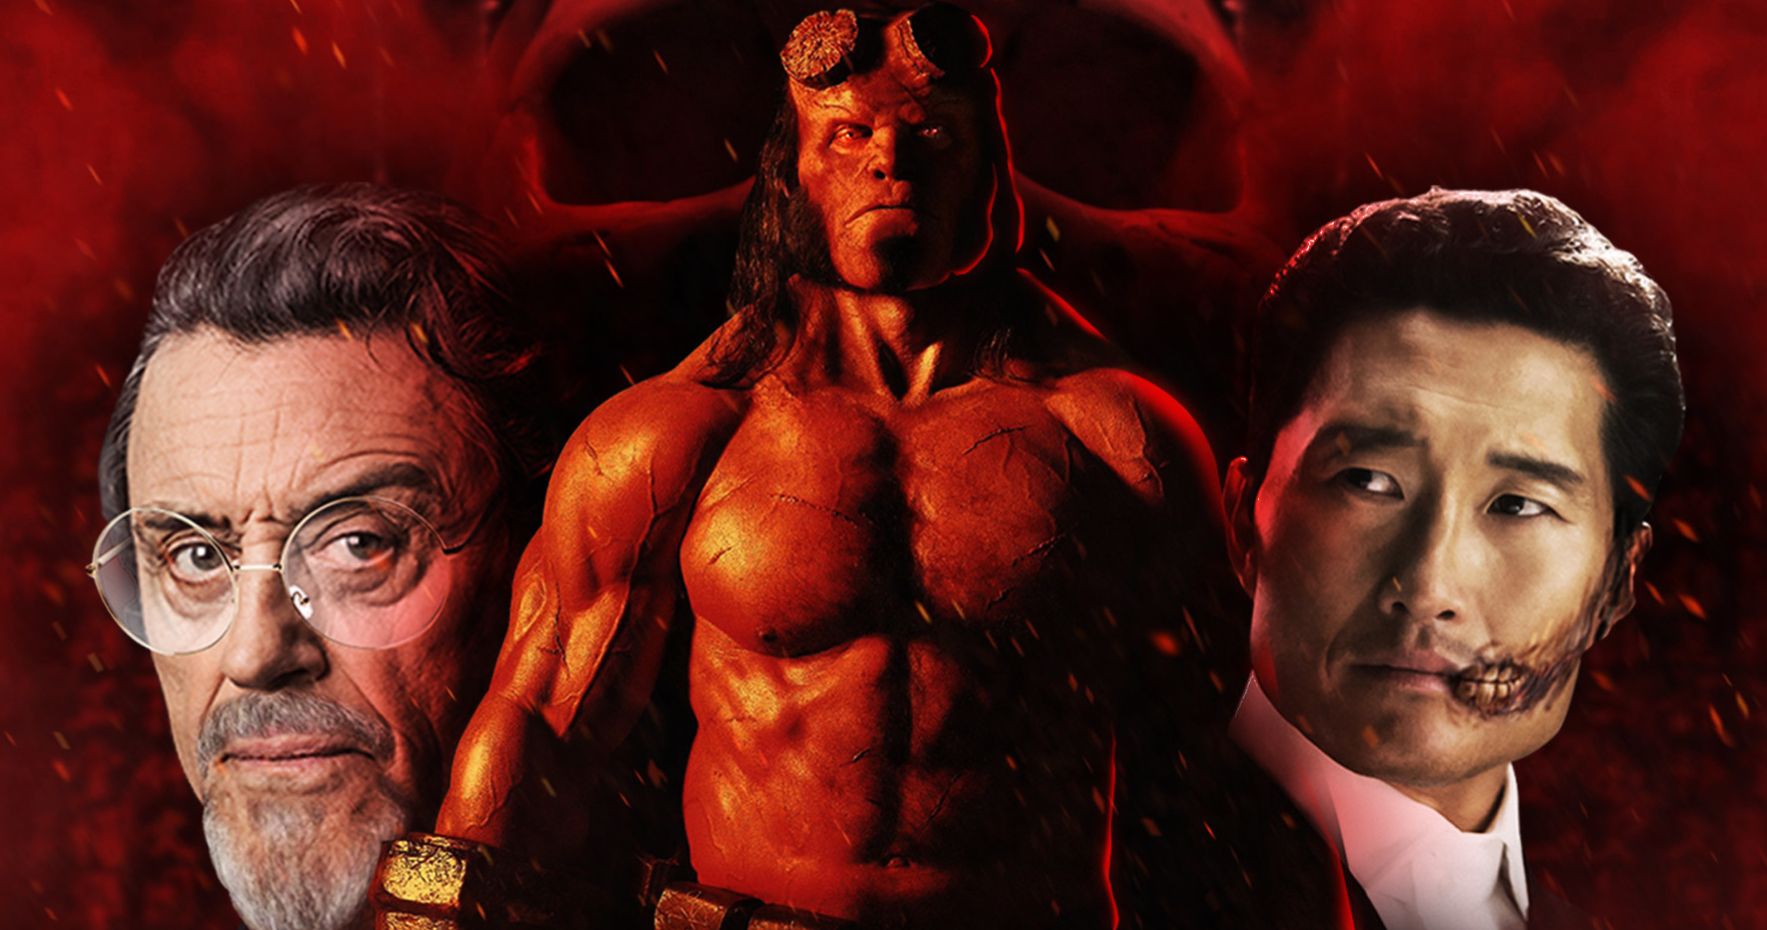 Hellboy Remake Dumped to Amazon Prime Just Months After Hitting Theaters